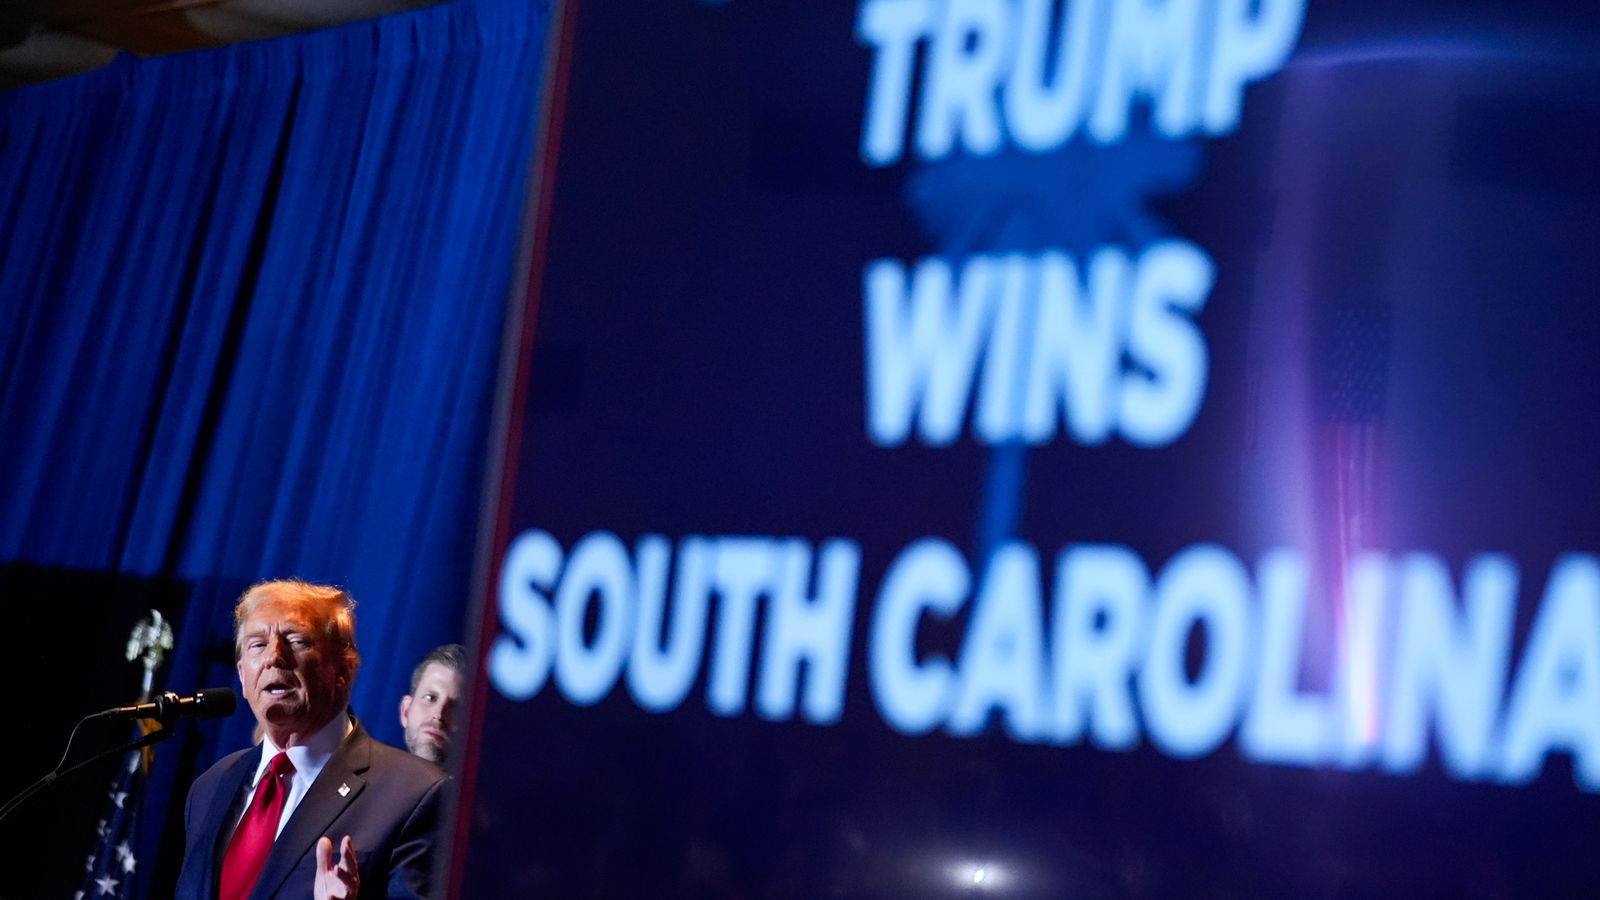 Donald Trump wins South Carolina primary as Nikki Haley insists she is 'not giving up fight'